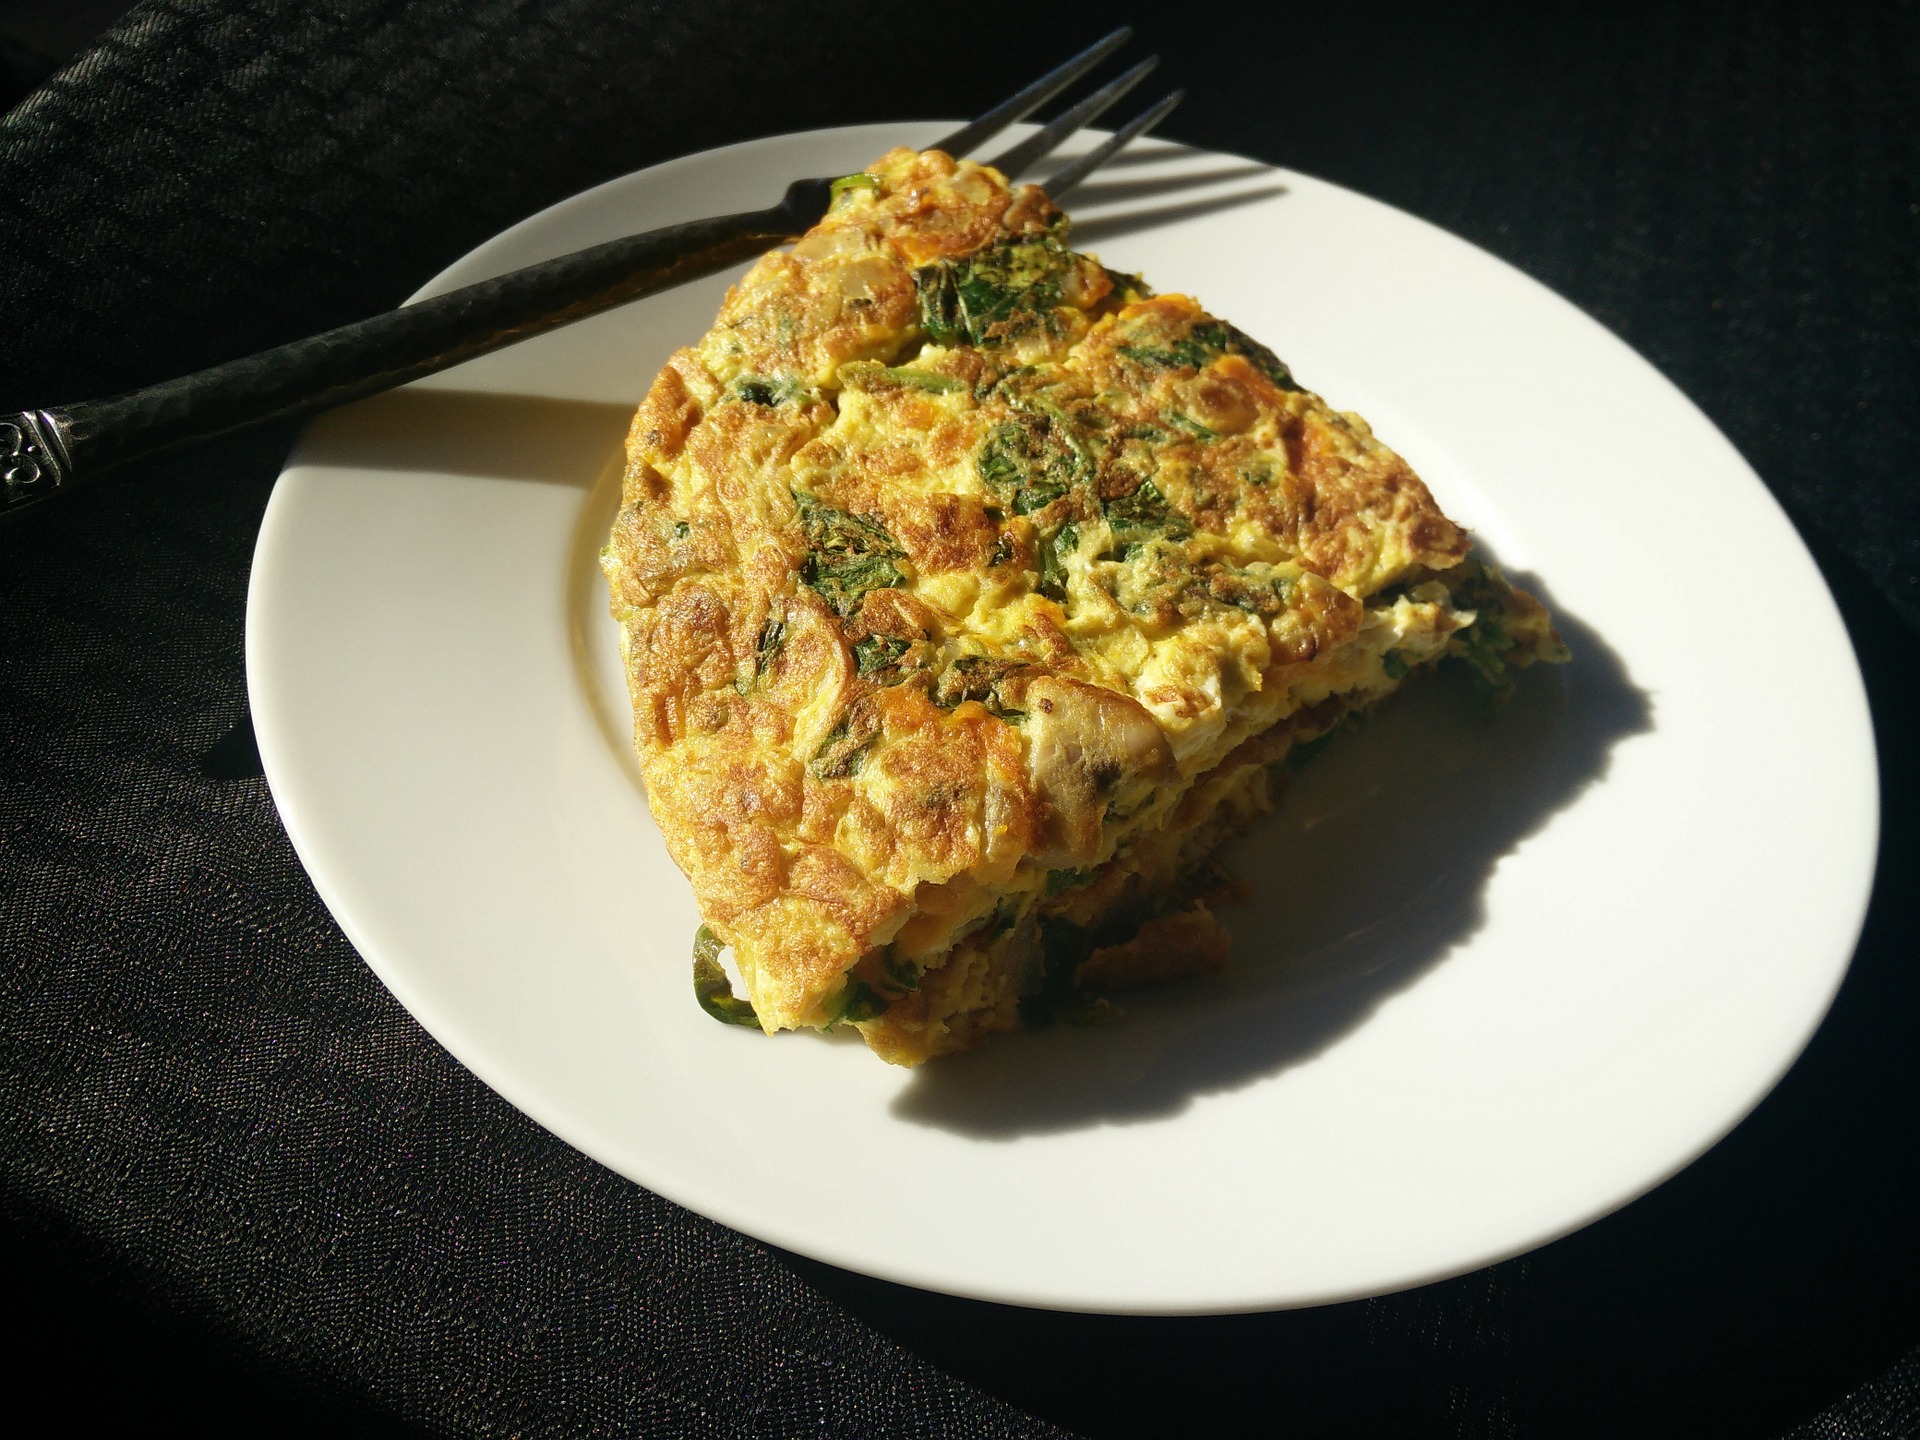 This broccoli cheese fritata is an easy-to-make one-pan meal that includes eggs, a good source of nutrients. (Photo courtesy of Pixabay)